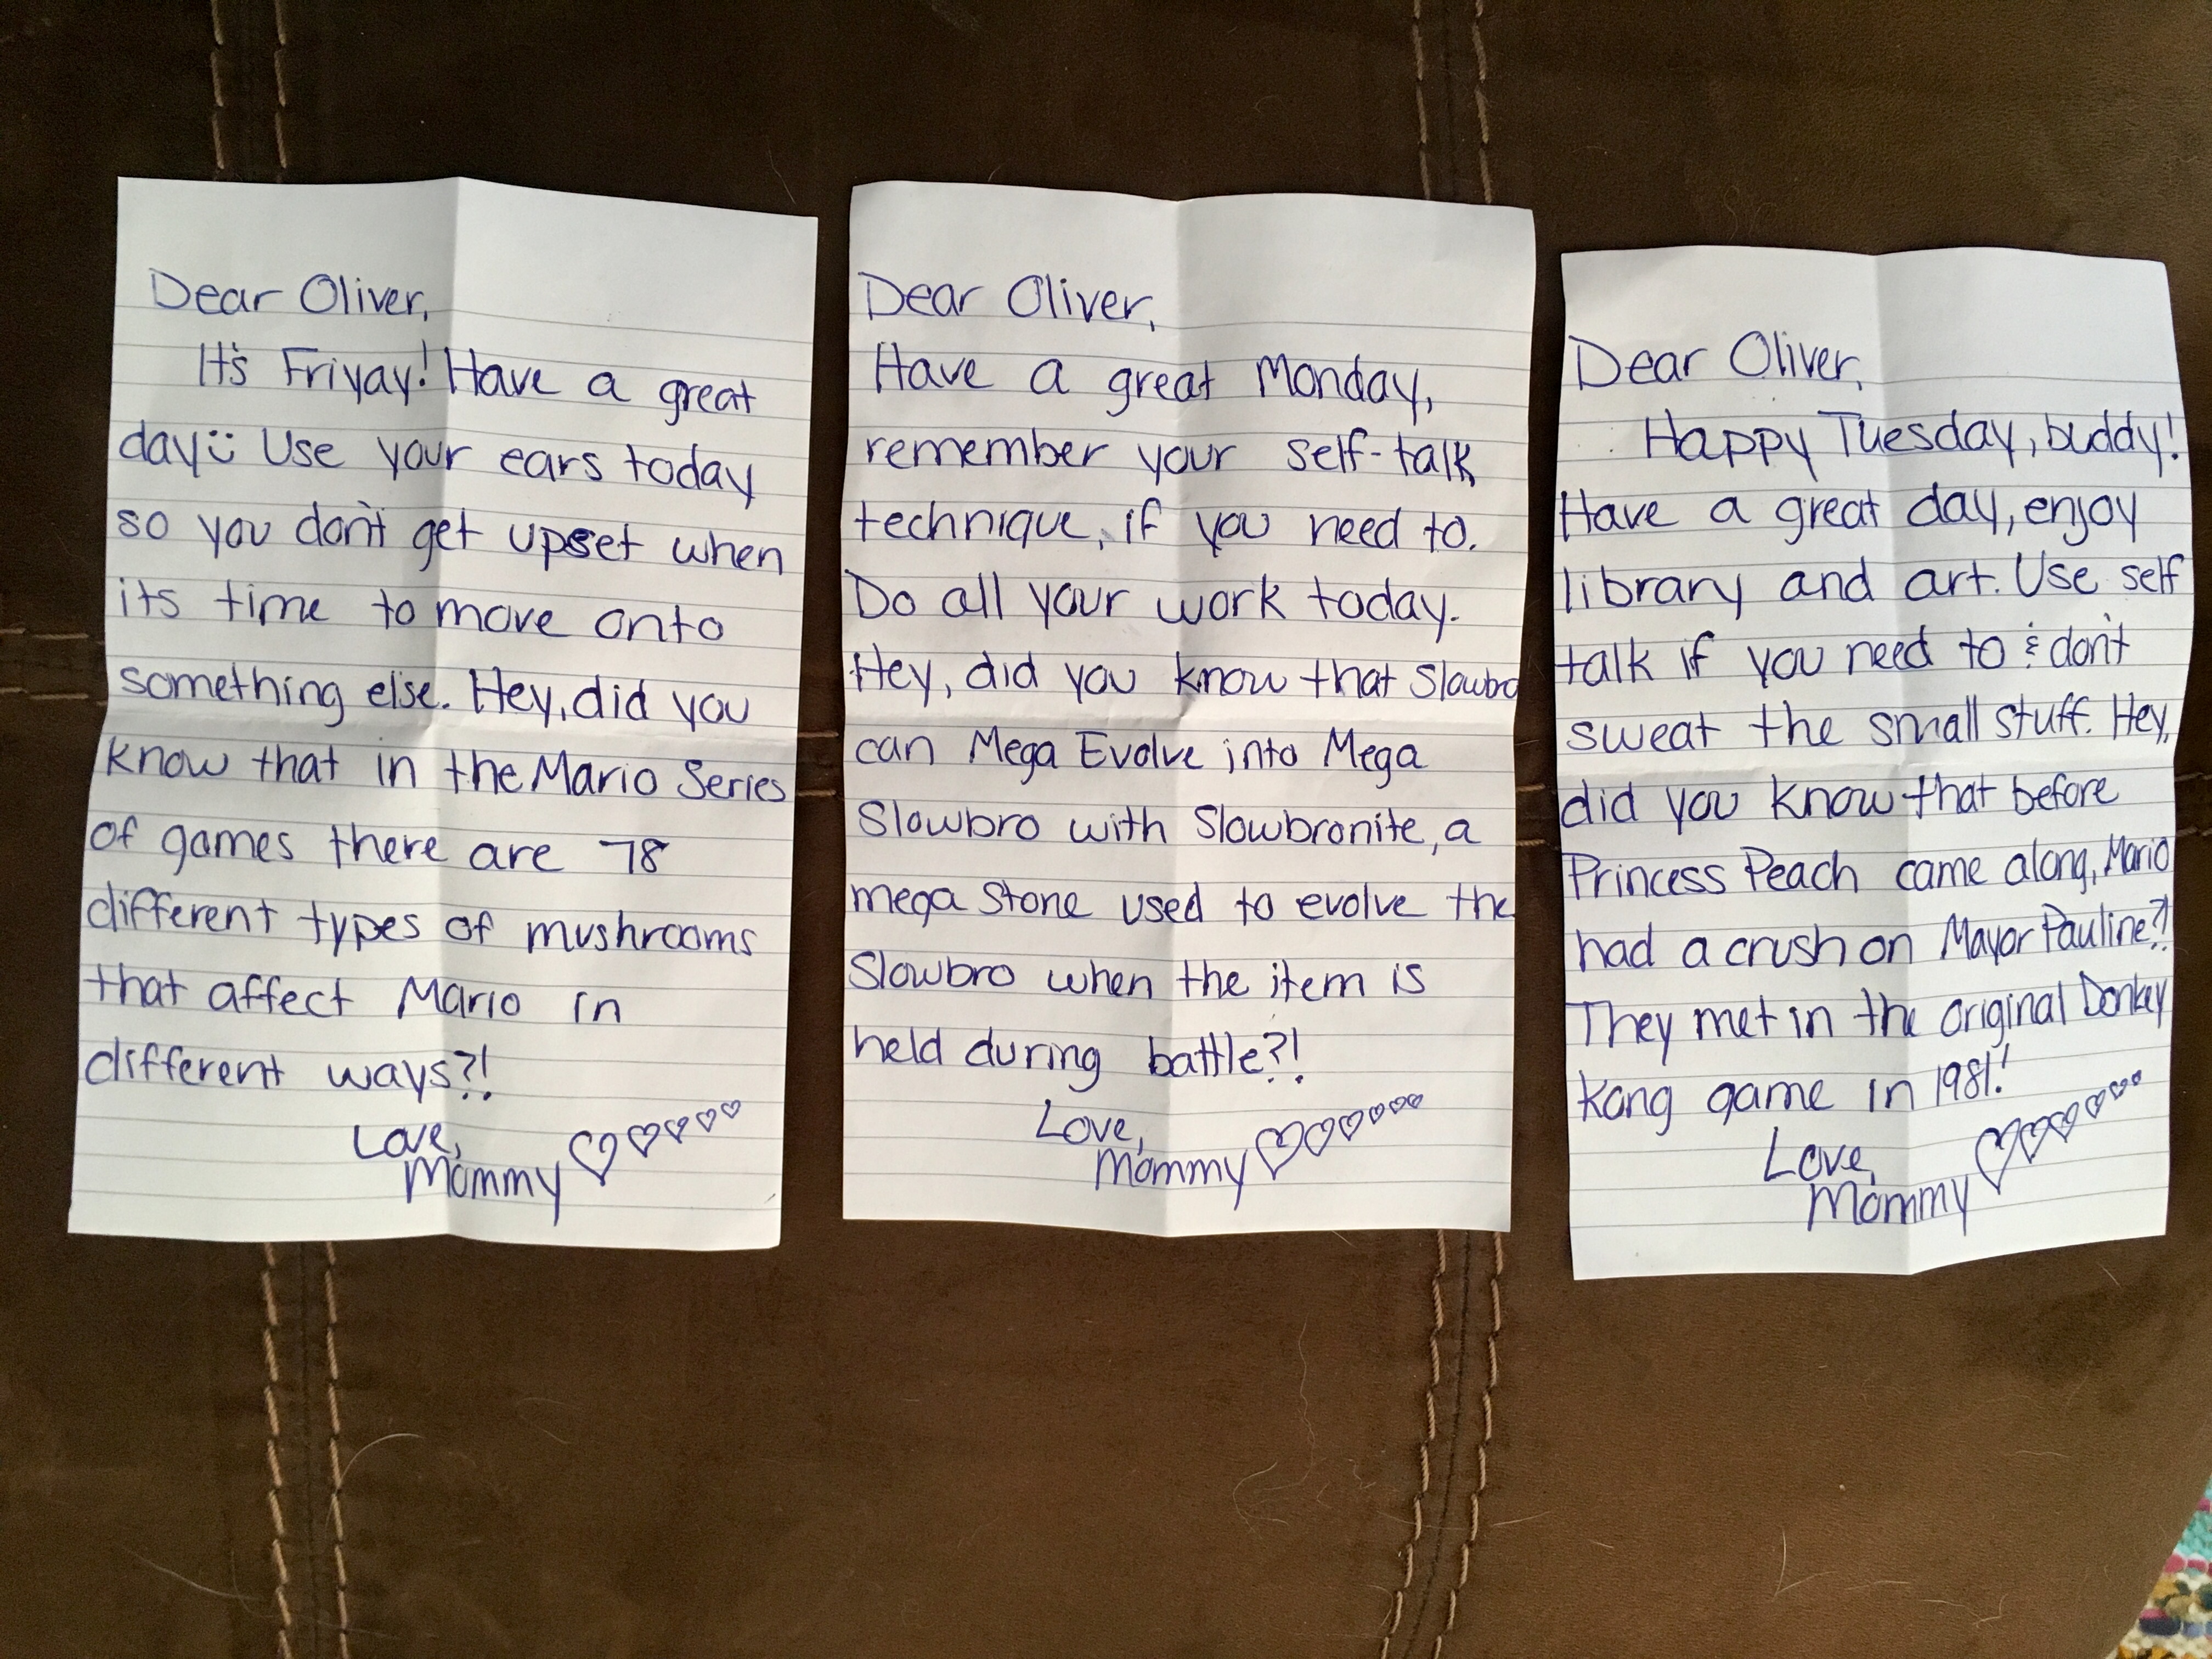 The notes Tori included in her son's snack